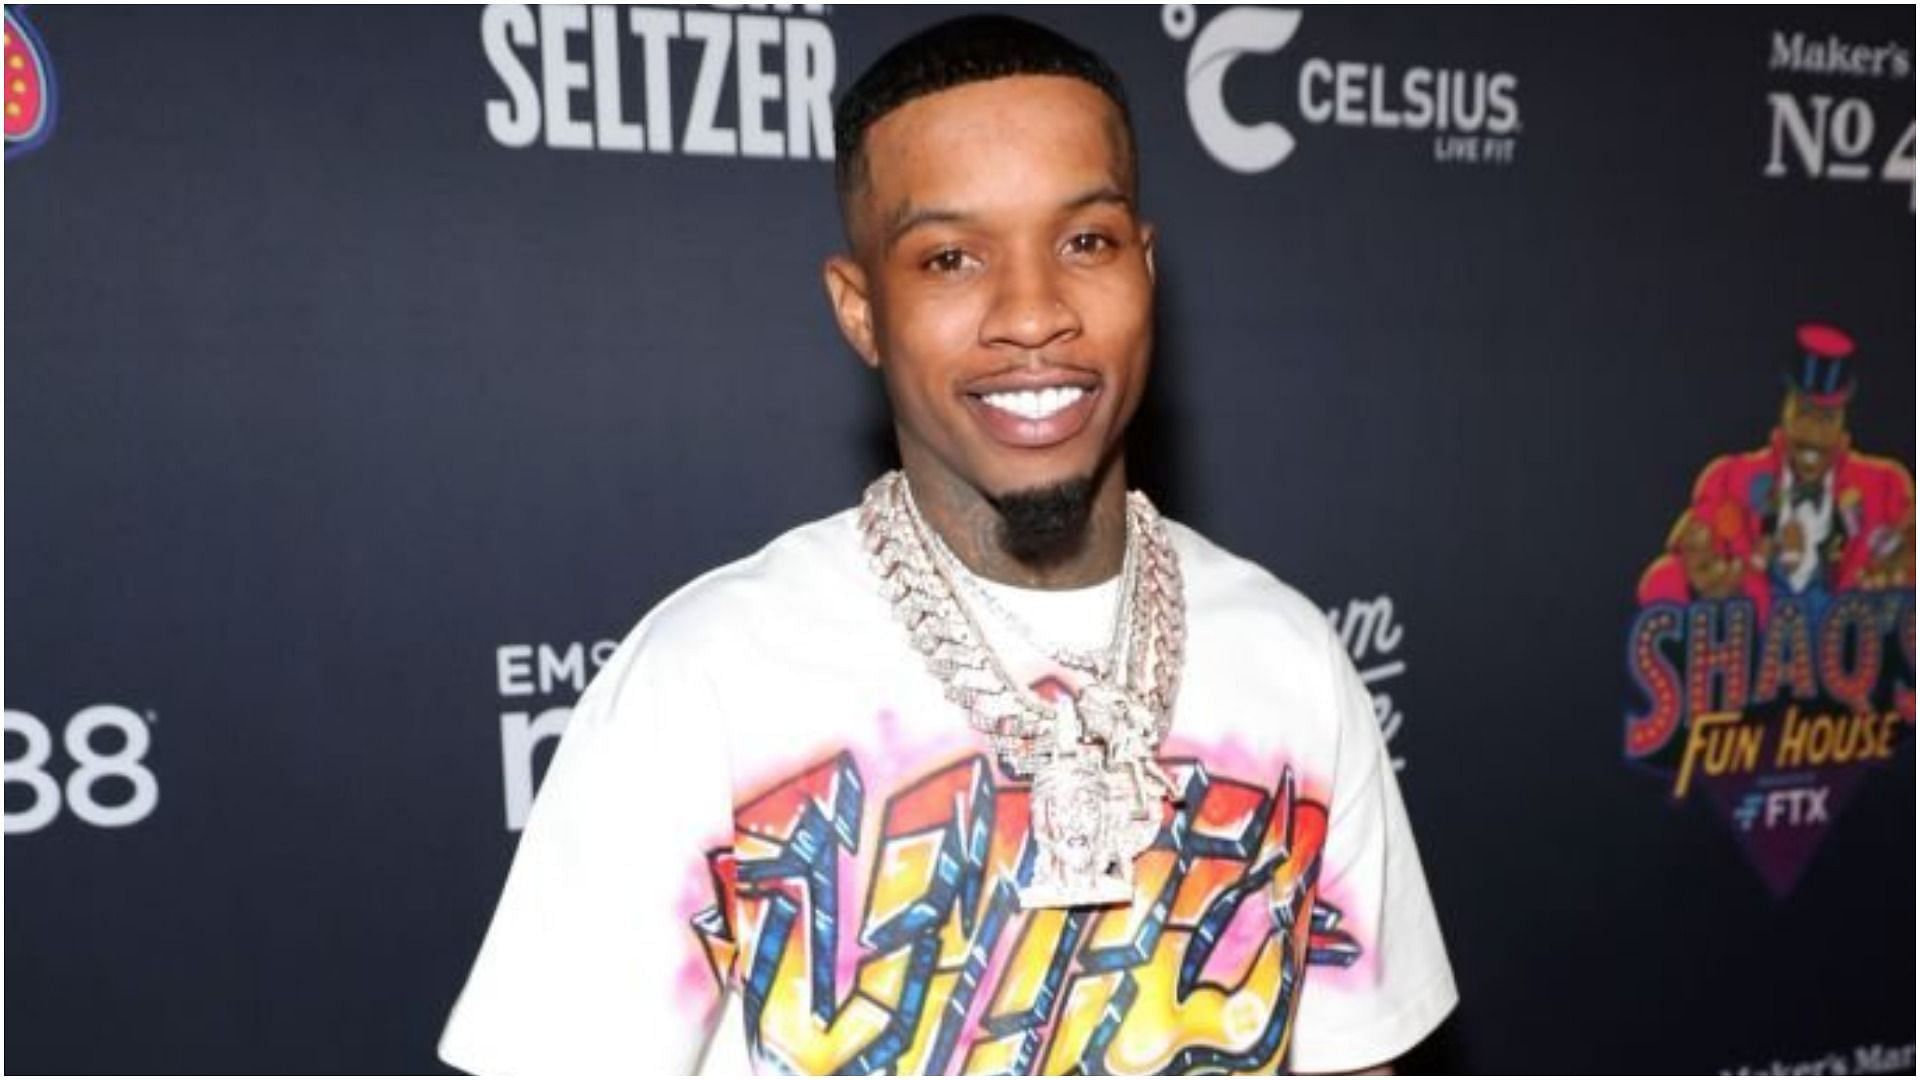 Tory Lanez has accumulated a lot of wealth from his work in the music industry (Image via Leon Bennett/Getty Images)